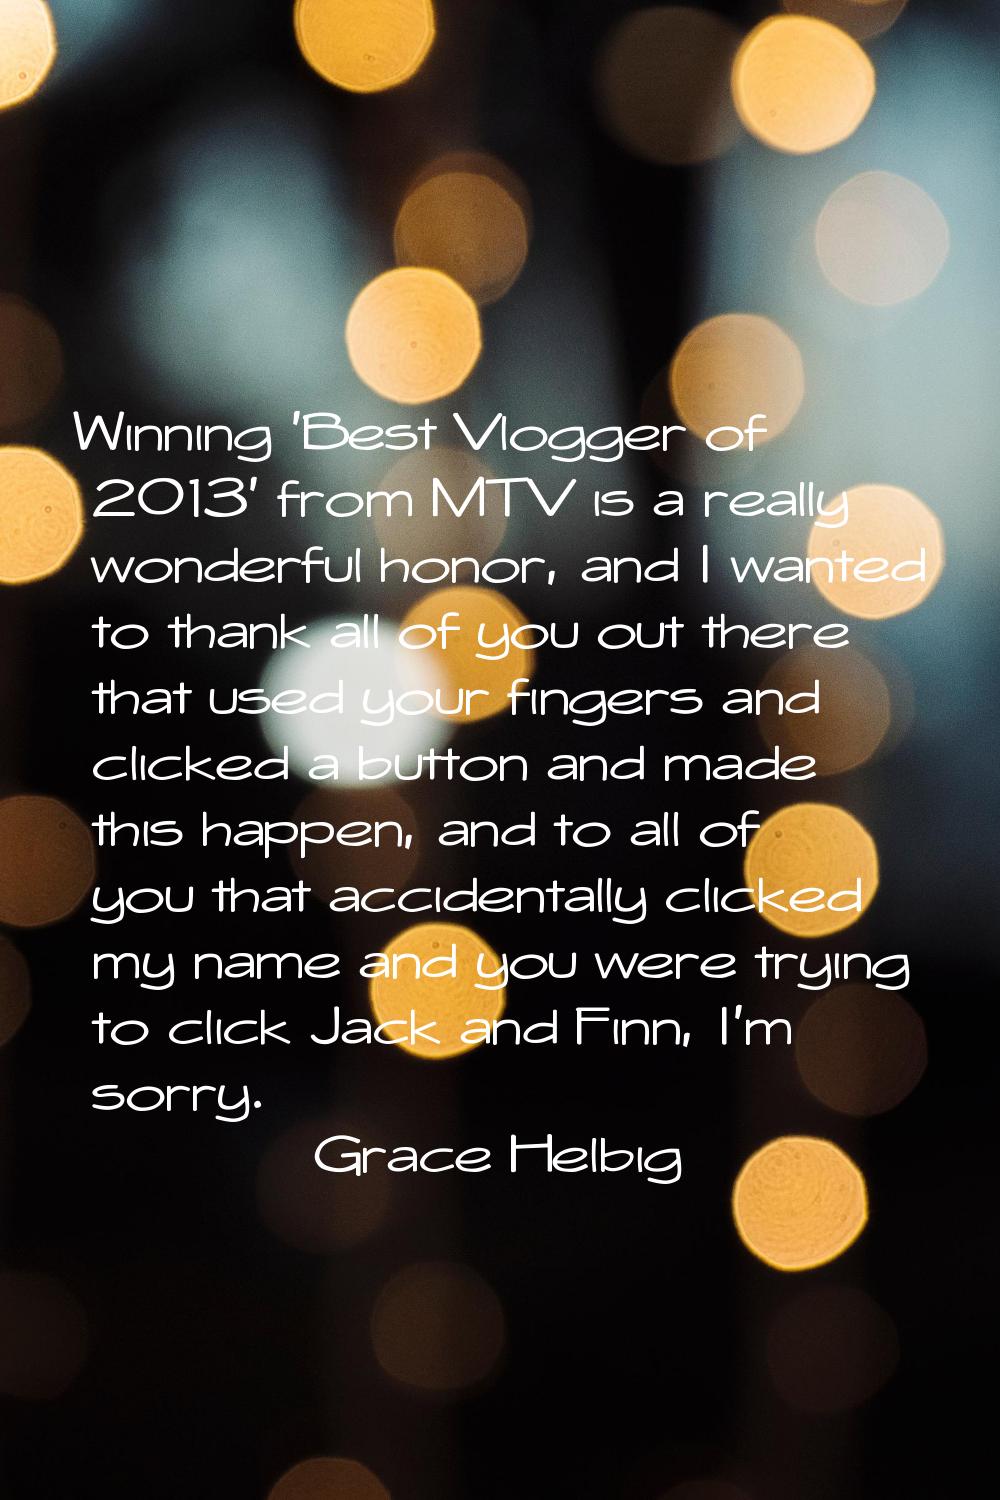 Winning 'Best Vlogger of 2013' from MTV is a really wonderful honor, and I wanted to thank all of y